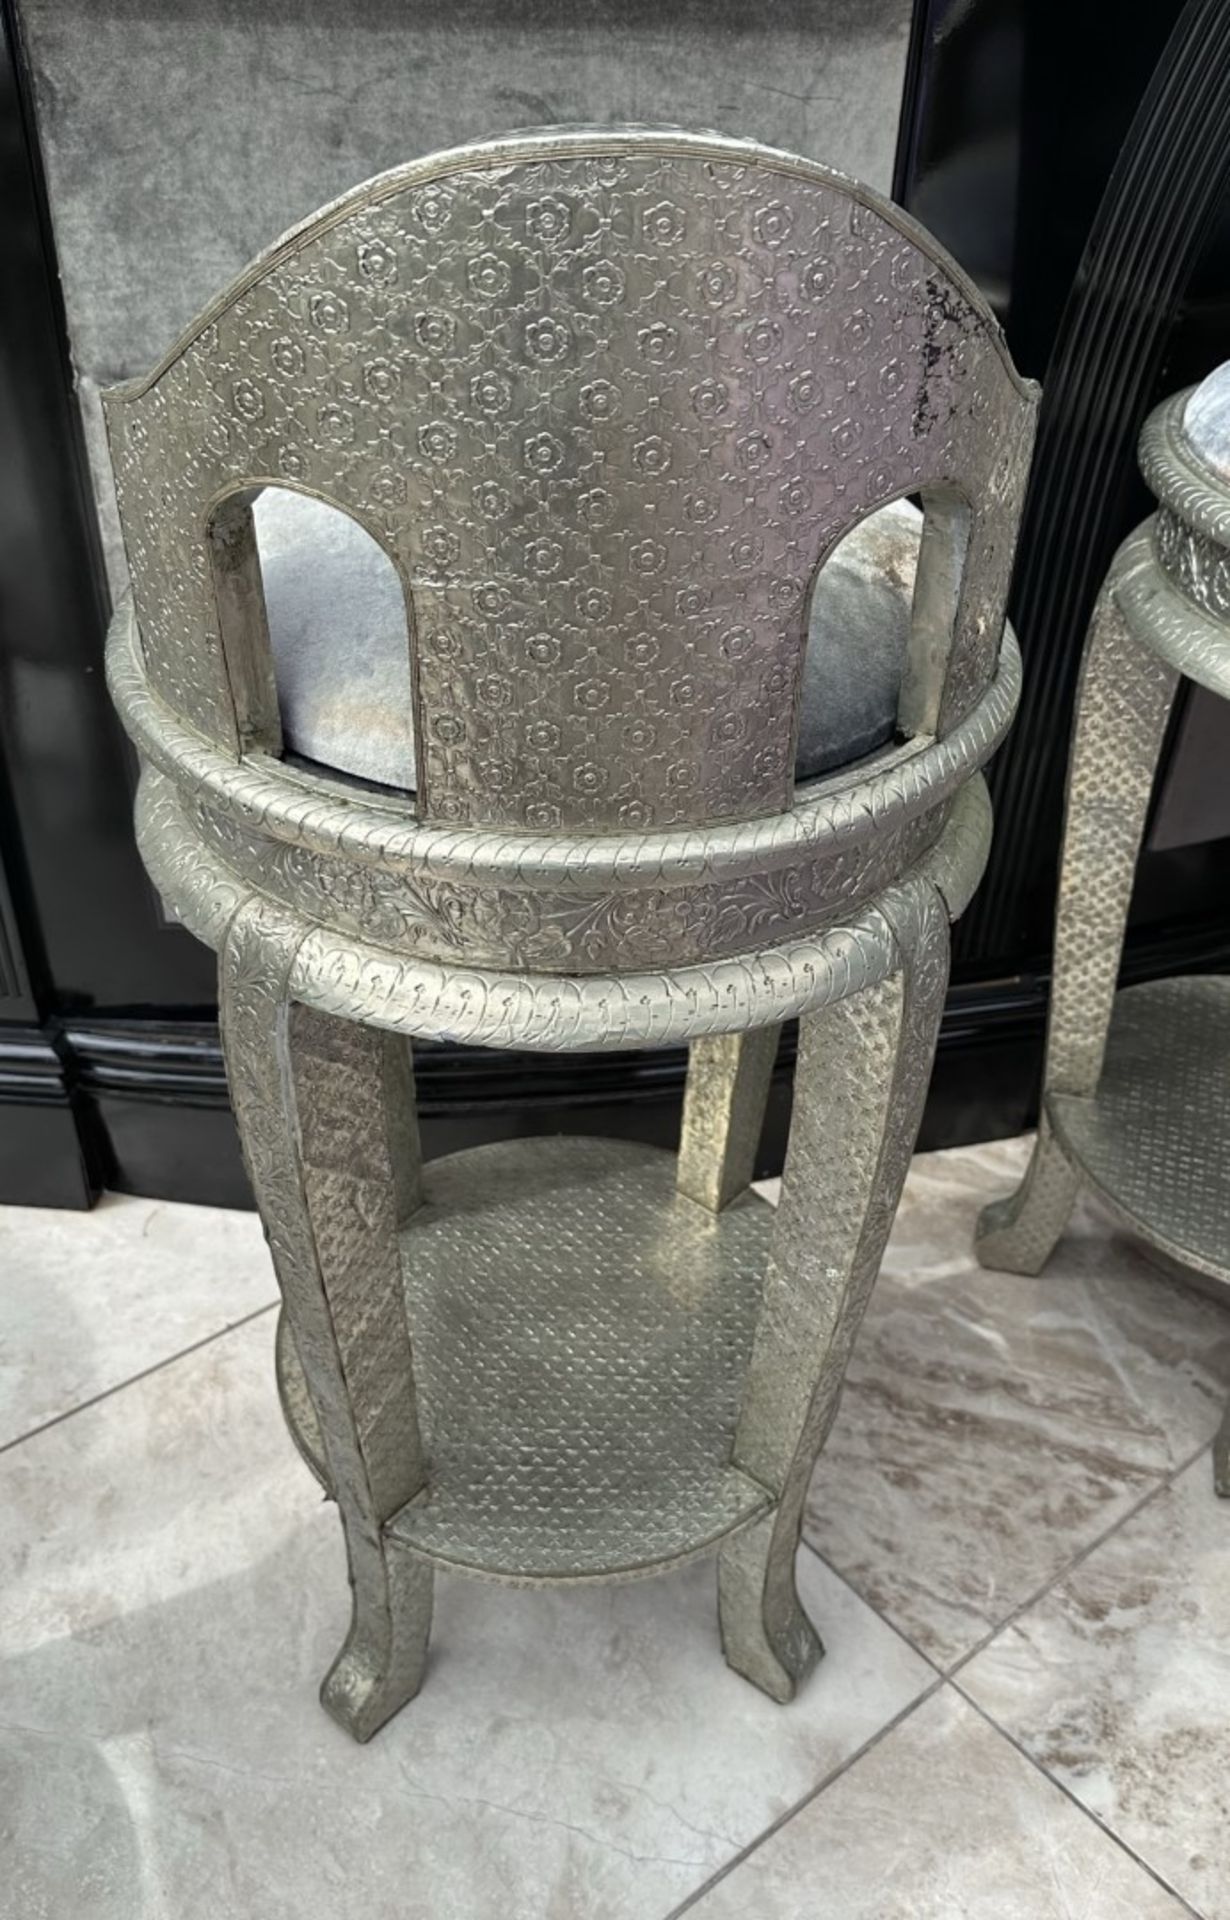 6 x Ornate Silver Tone Bar Stools With Grey Velvet Seat Pads - Image 10 of 16